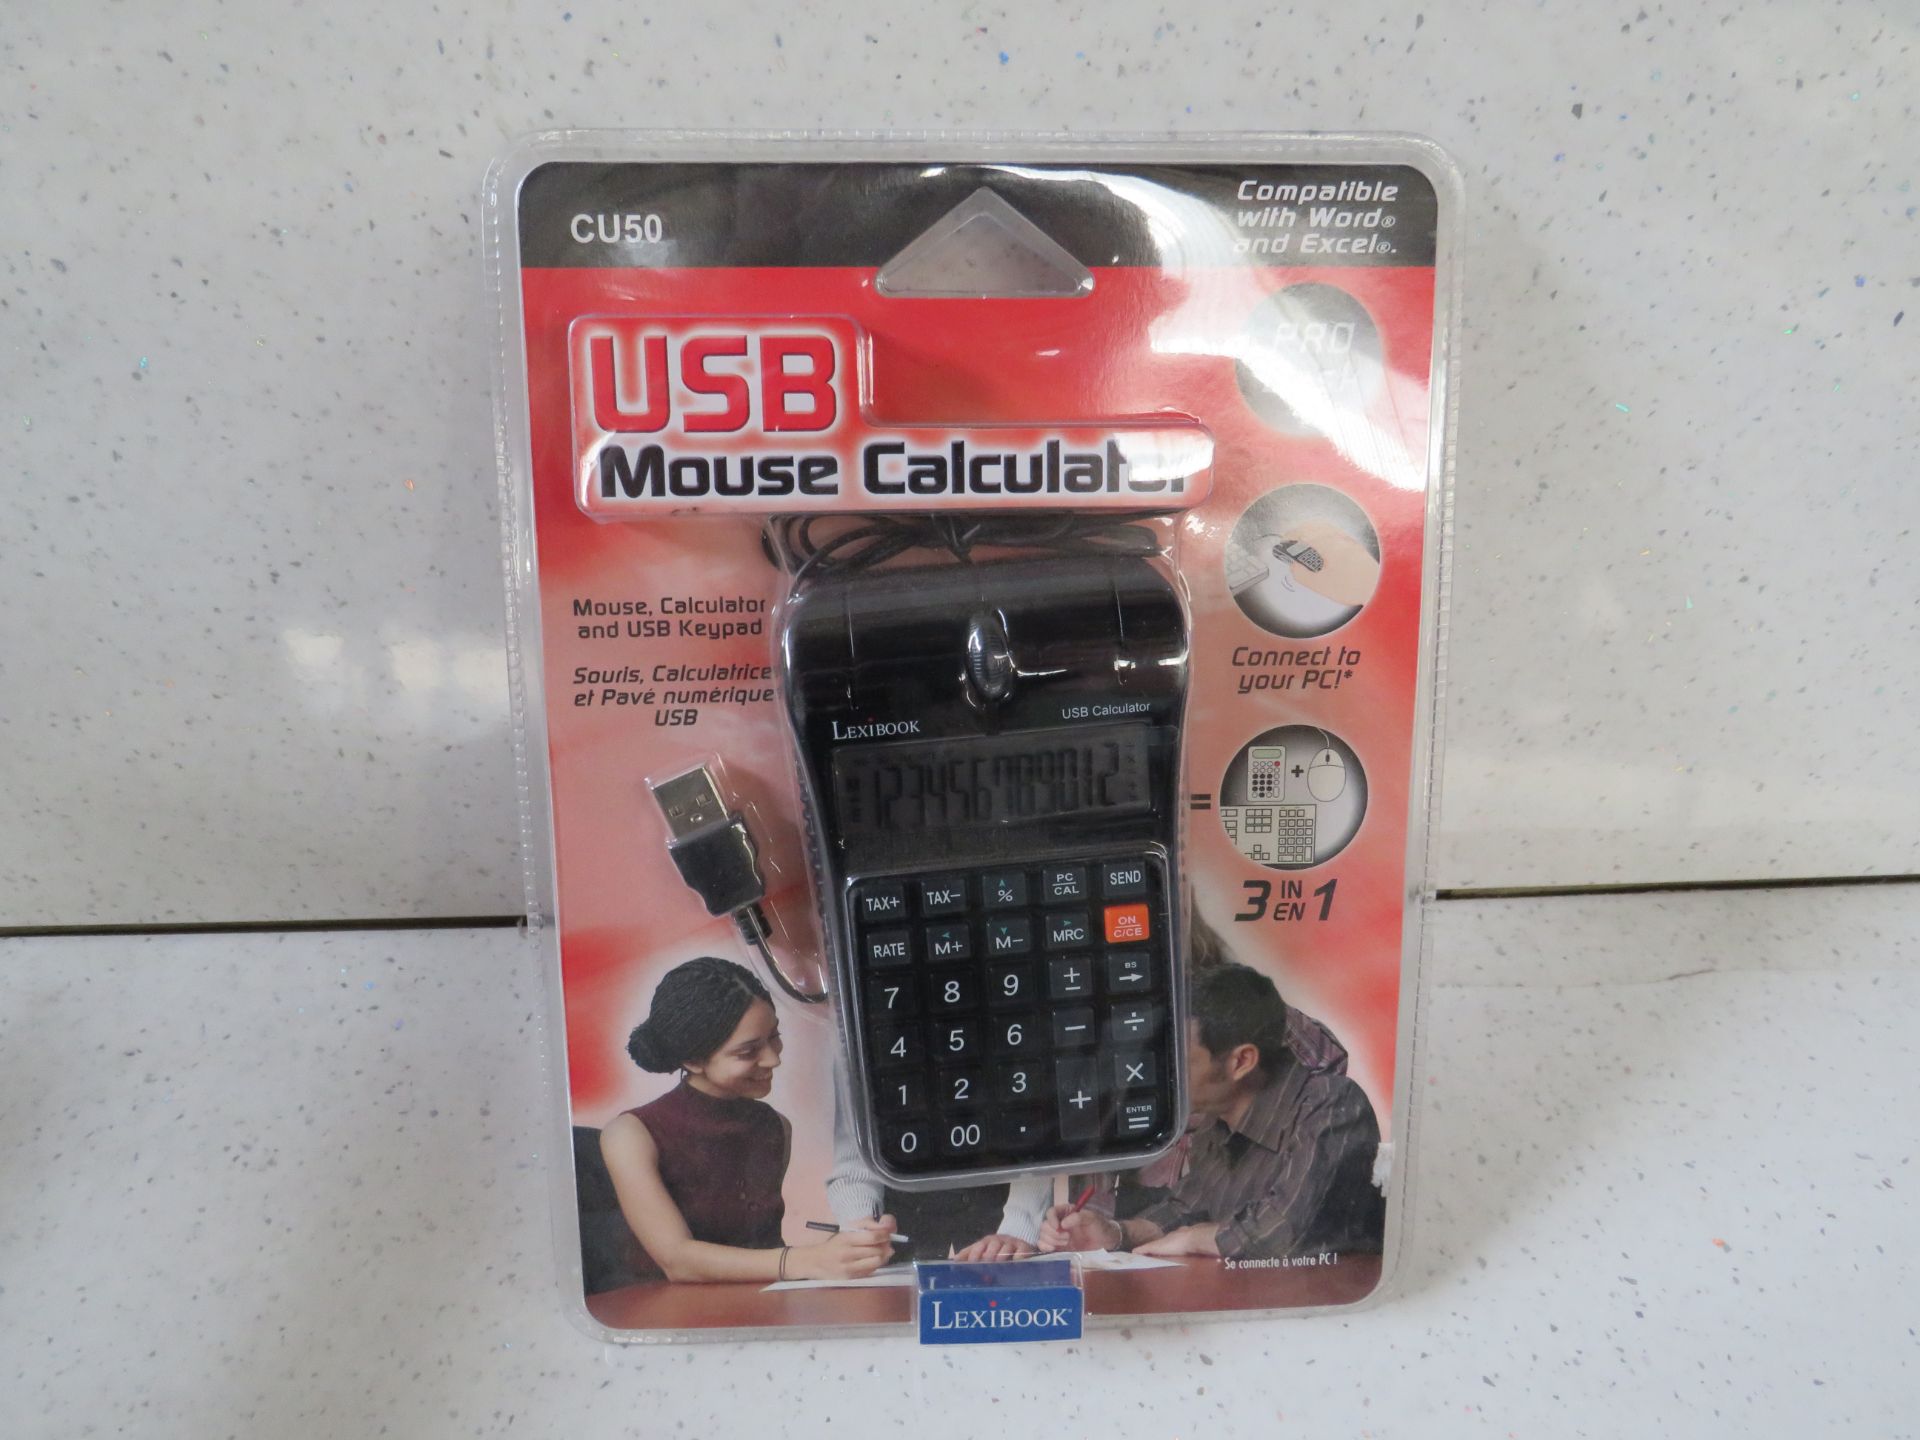 24x Lexibook - USB Mouse Calculator - Unused & Packaged.